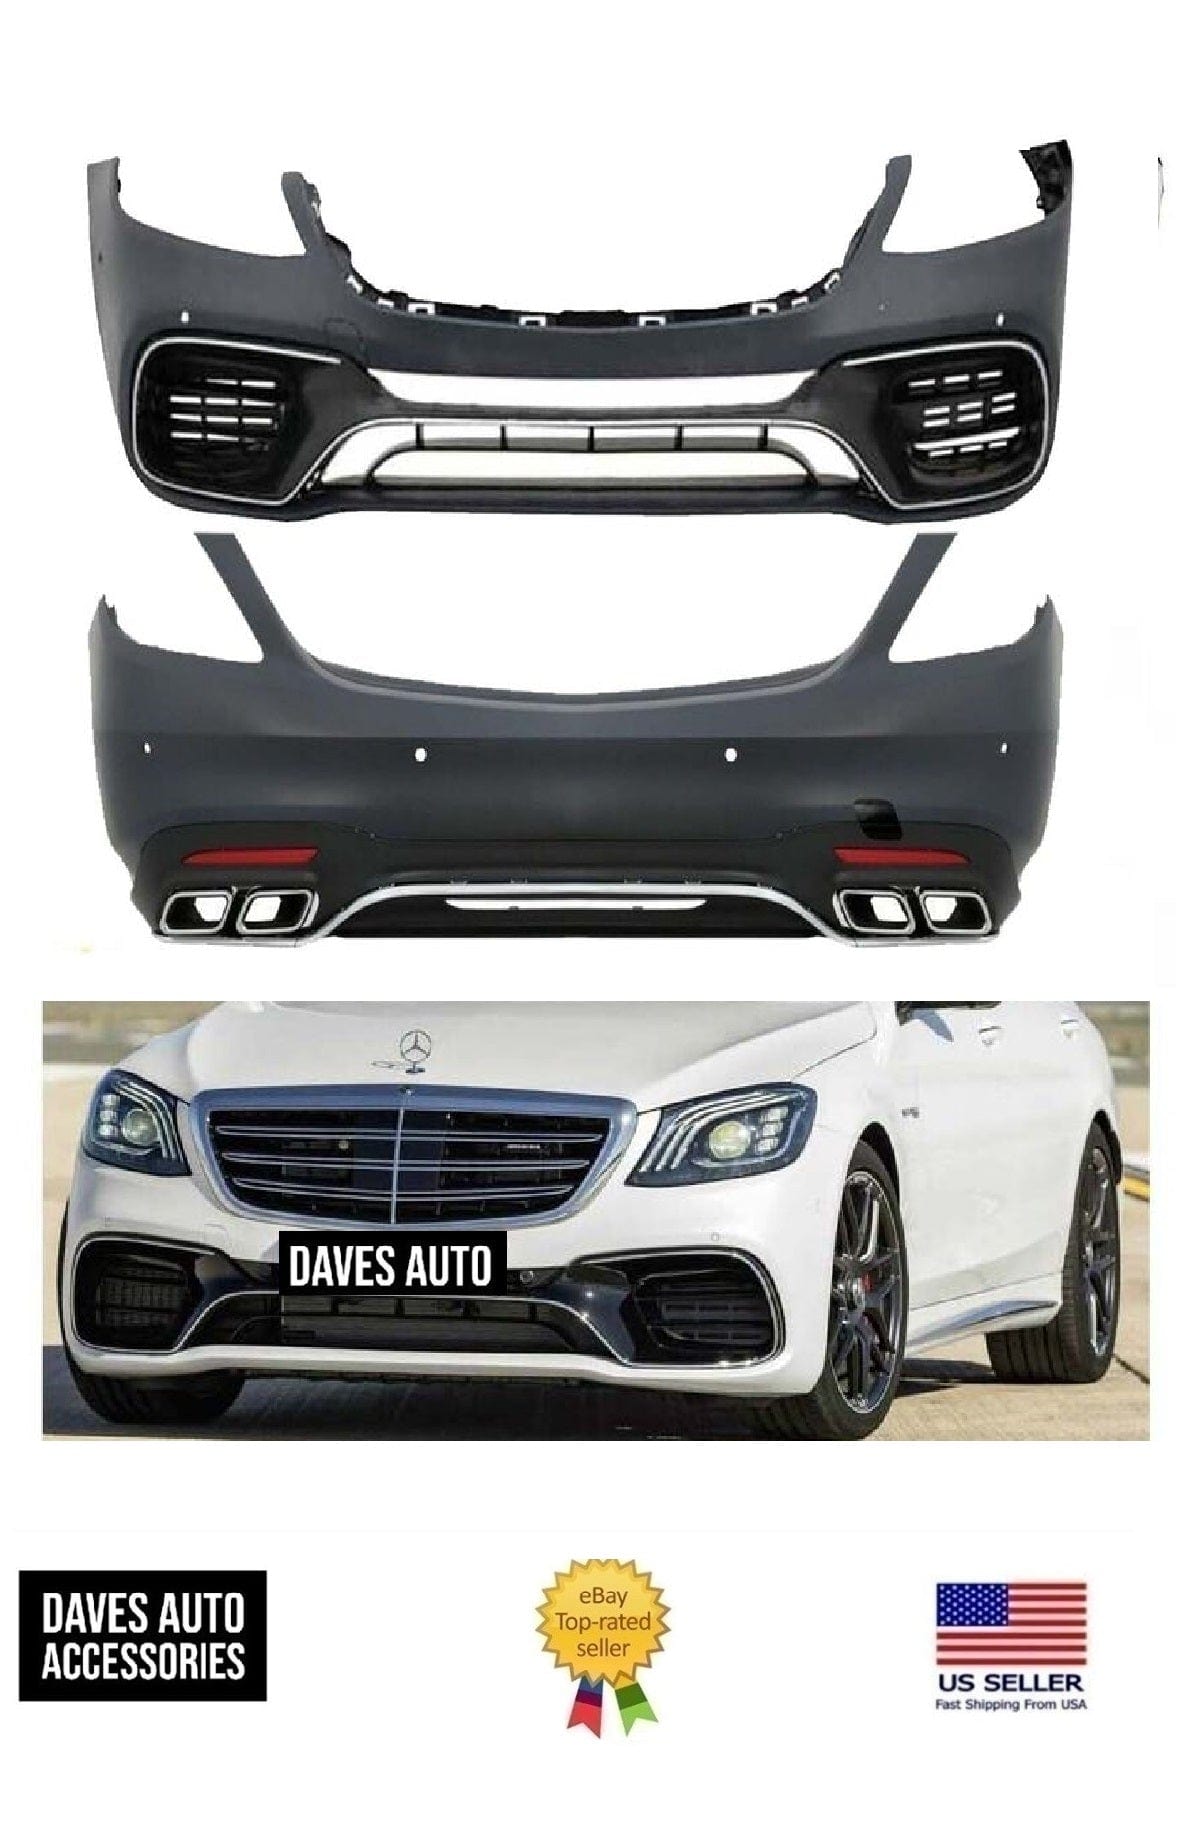 S-Class Maybach 680 full Conversion body kit bumper grille 2021 2022 2023